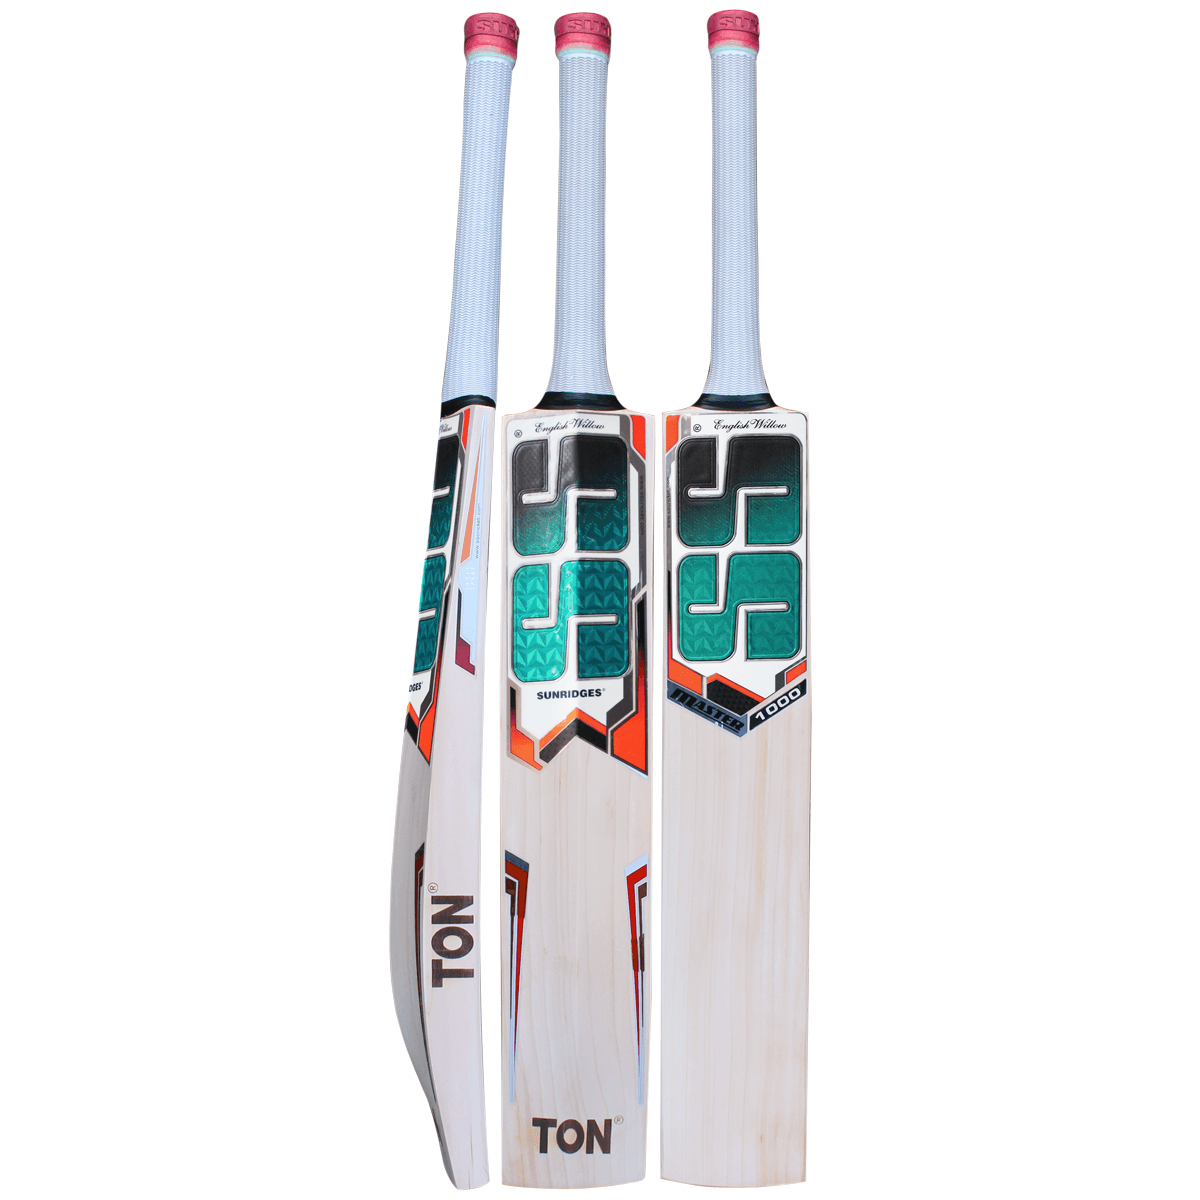 Buy SS Master 1000 English Willow Cricket Bat lowest prices